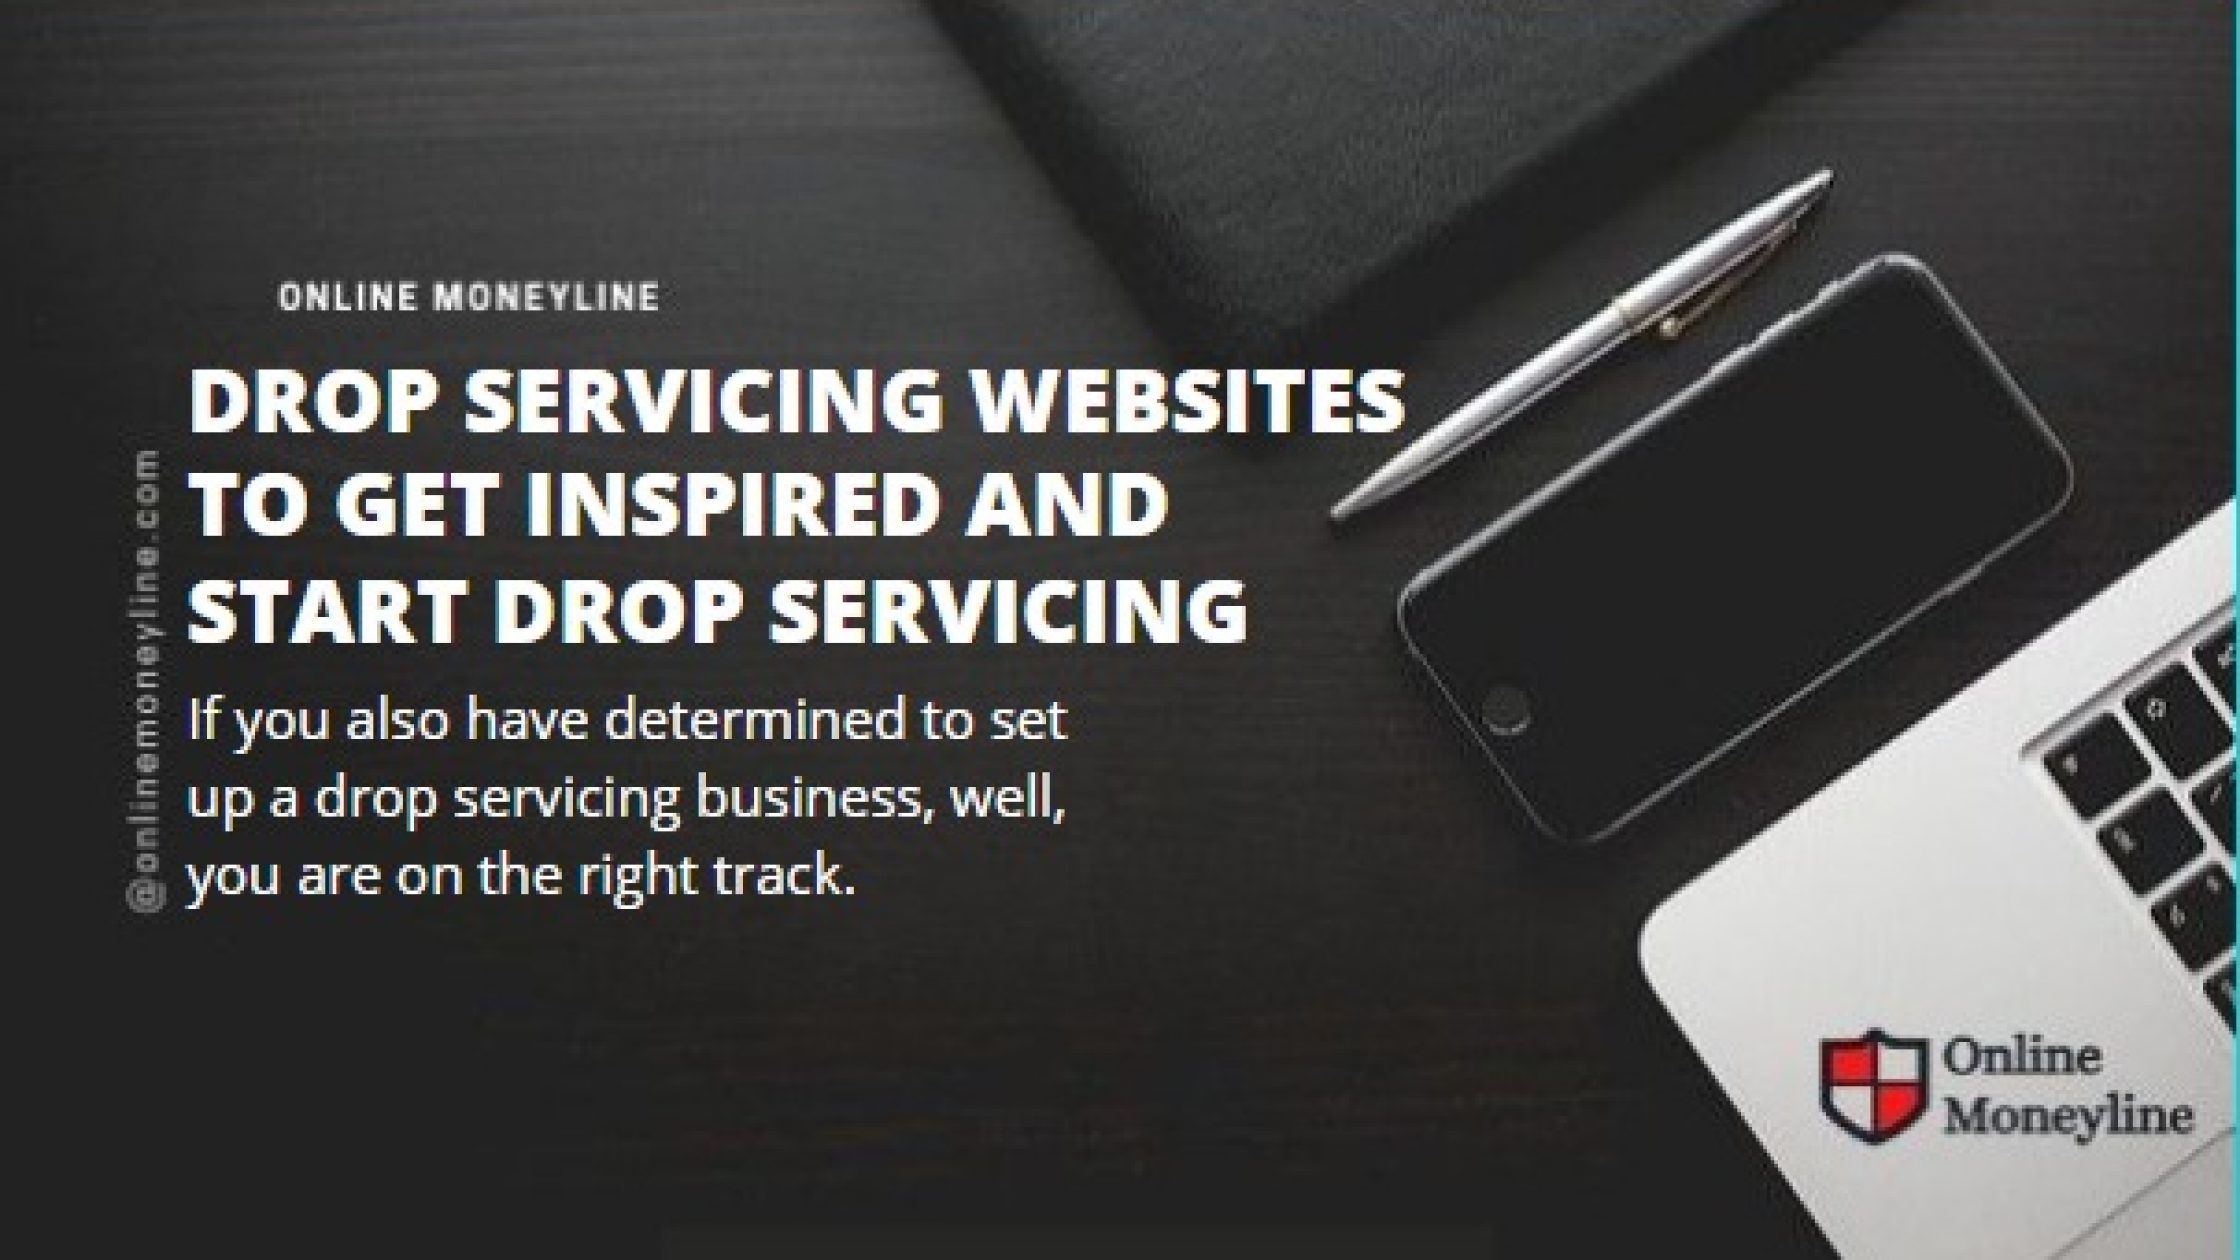 11 Drop Servicing Websites To Get Inspired And Start Drop Servicing